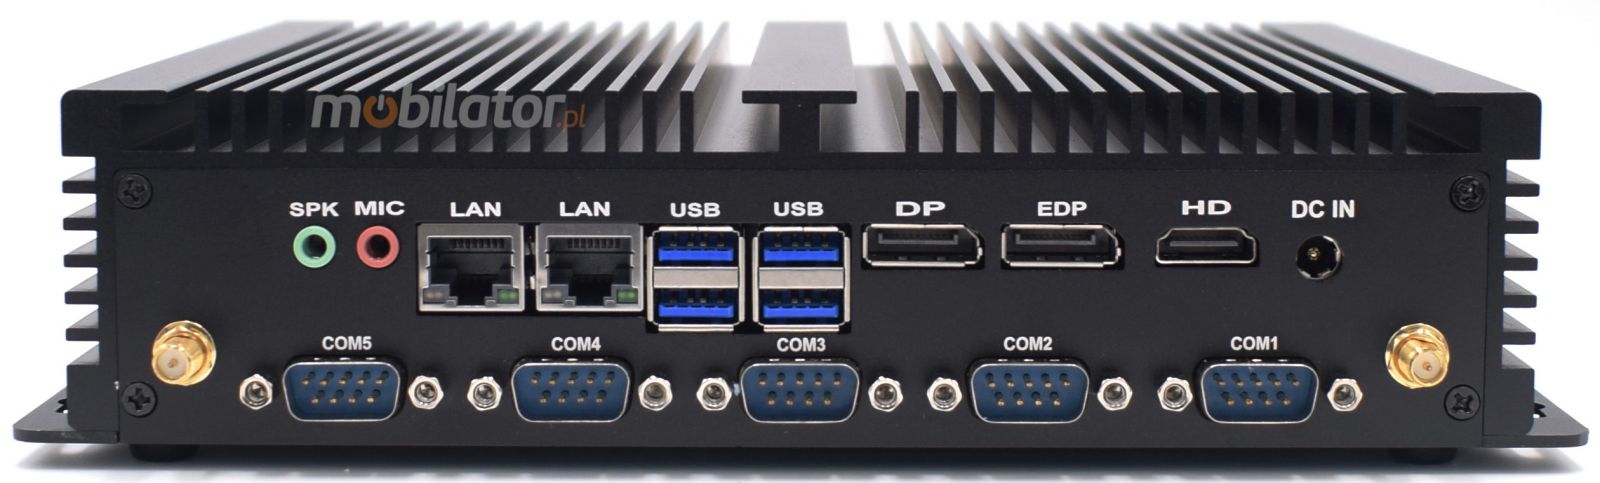 HyBOX H4 Intel i7  industrial mini computer with connectors: 